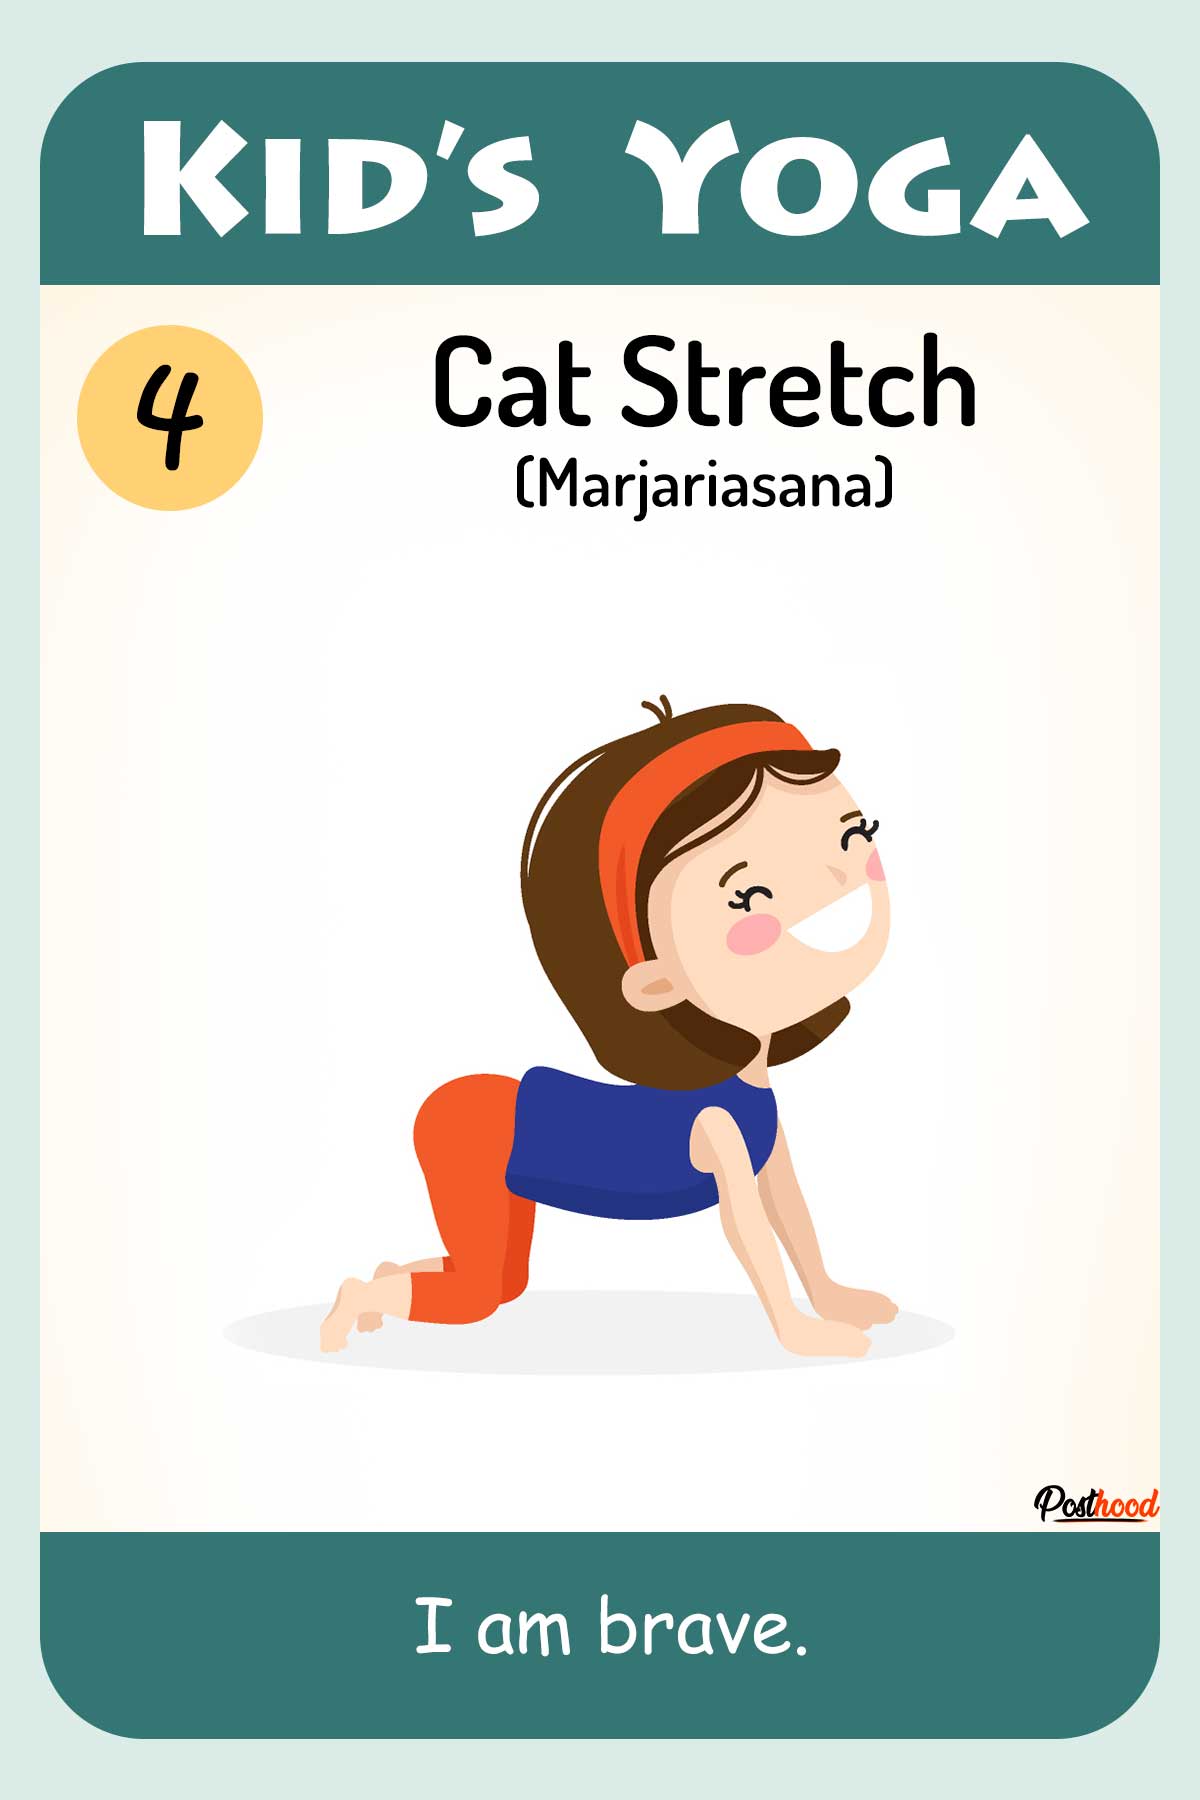 Fun animal yoga poses for your kids. Print and tag these easy kids' yoga cards to your wall or doors to engage your kids in yoga and fitness. 